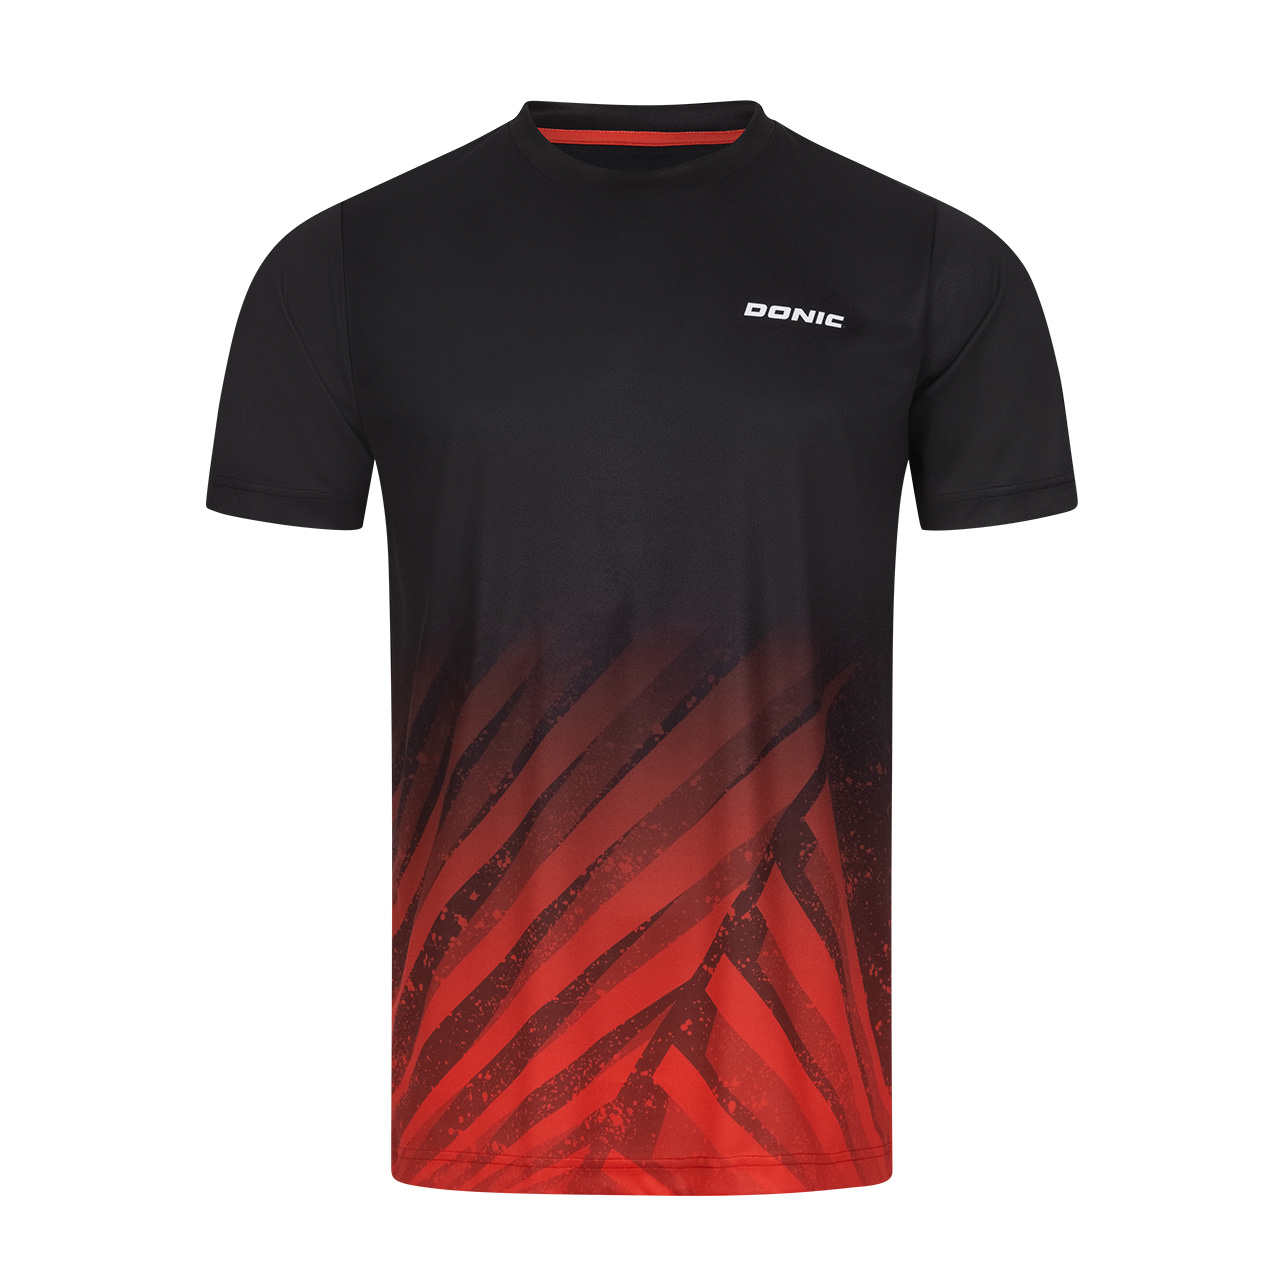 Donic Shirt Argon Black/Red - Jarvis Sports | Table Tennis